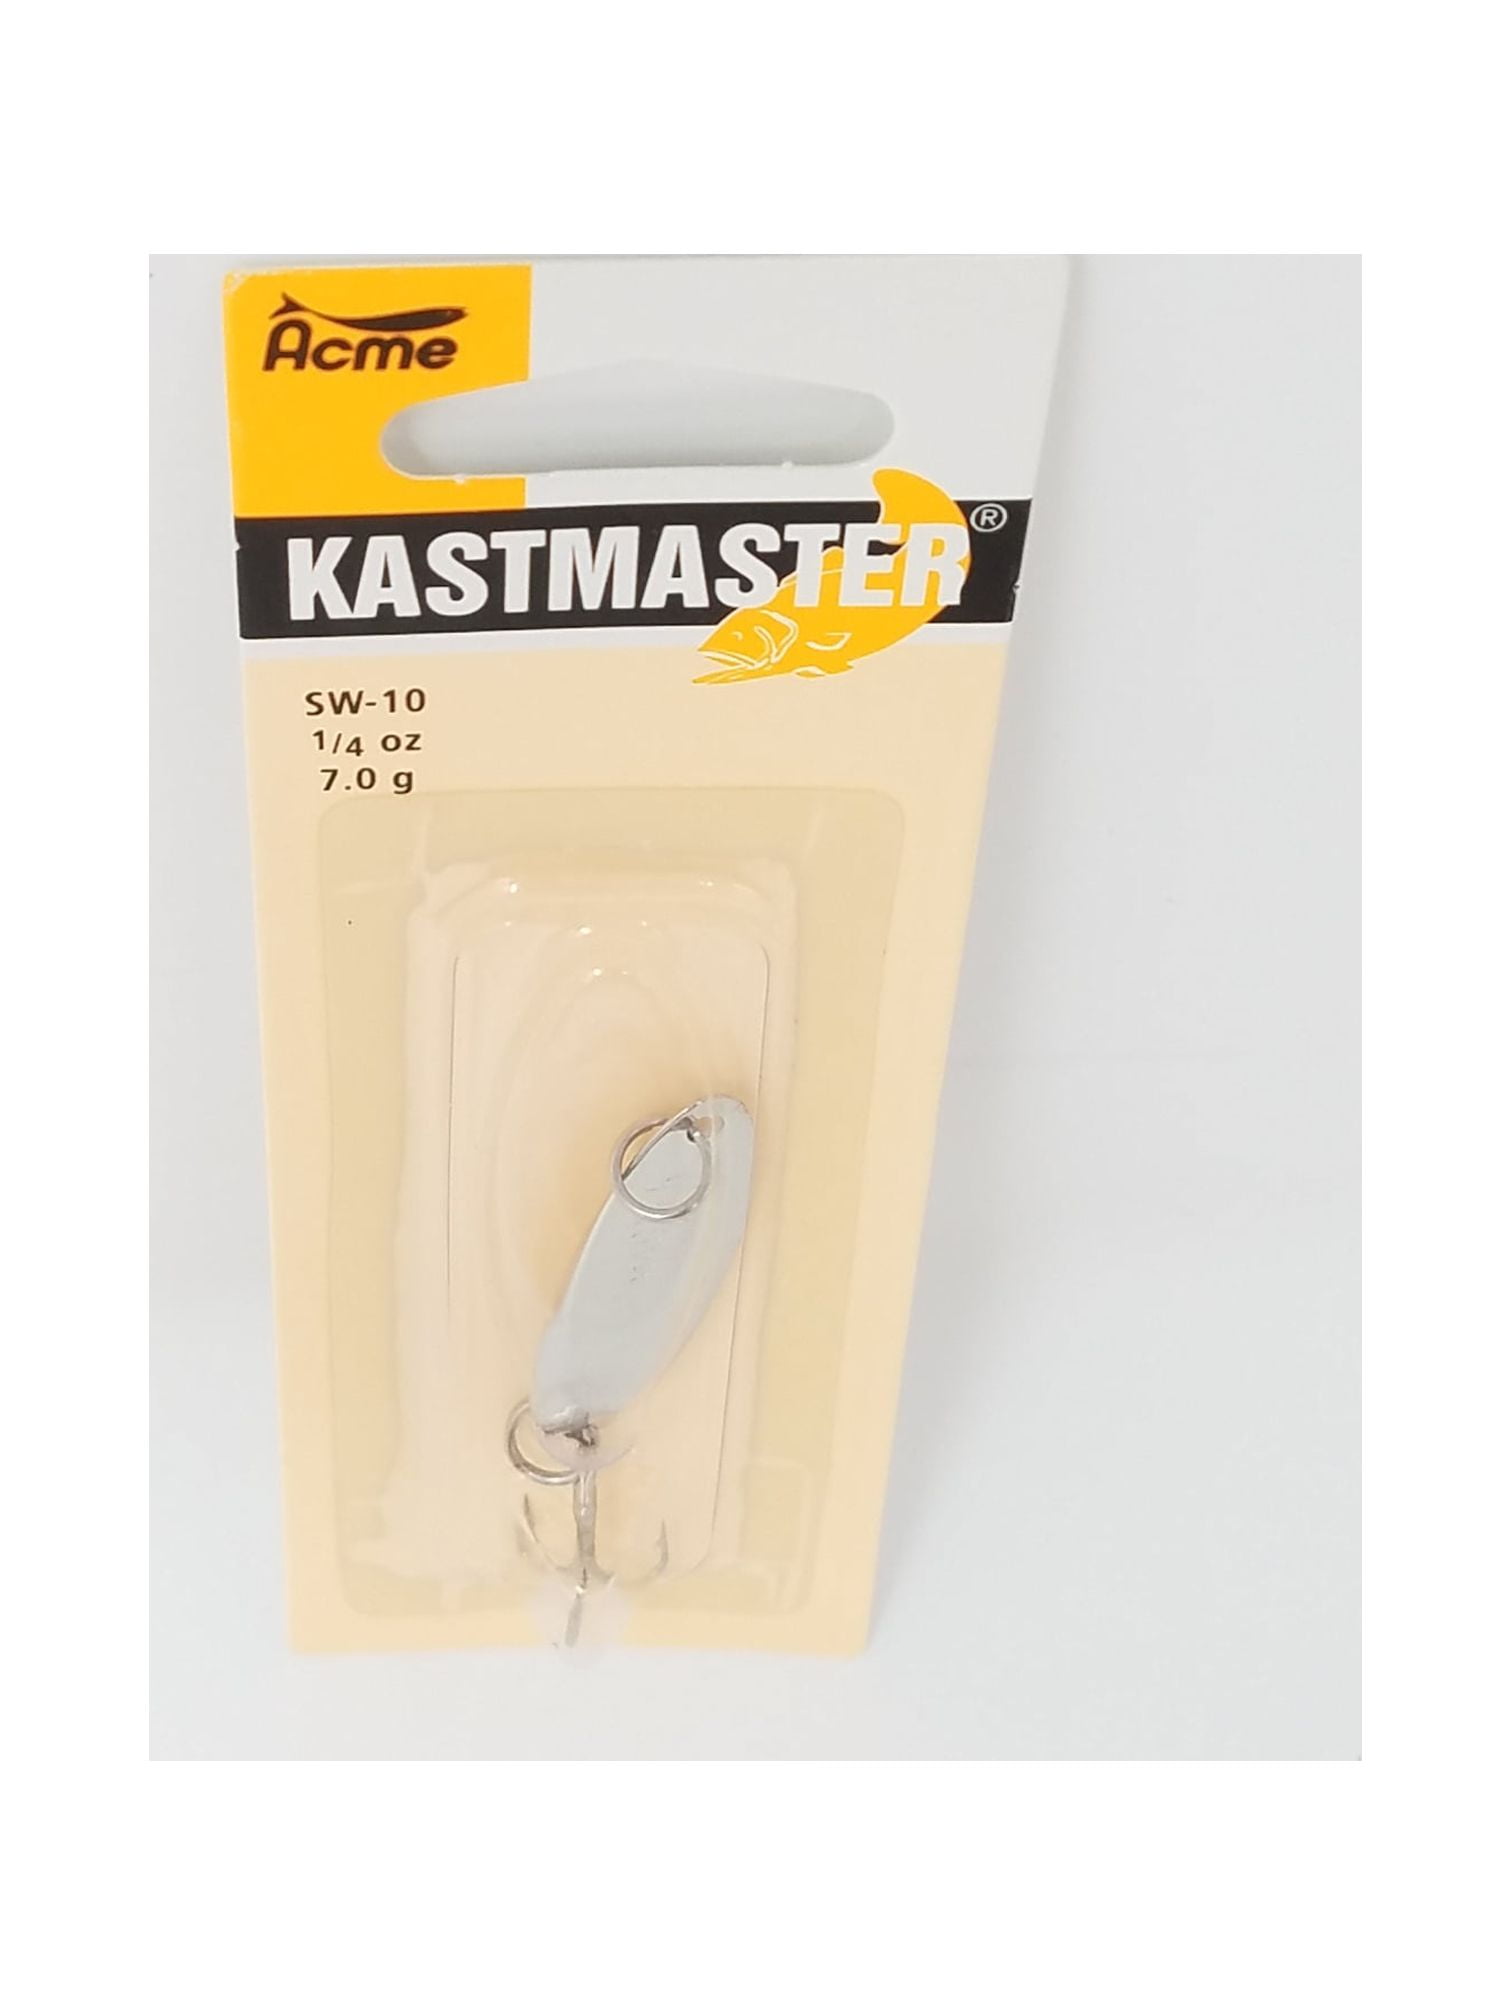 Acme Tackle Kastmaster Fishing Lure Spoon Chrome 1/4 oz.